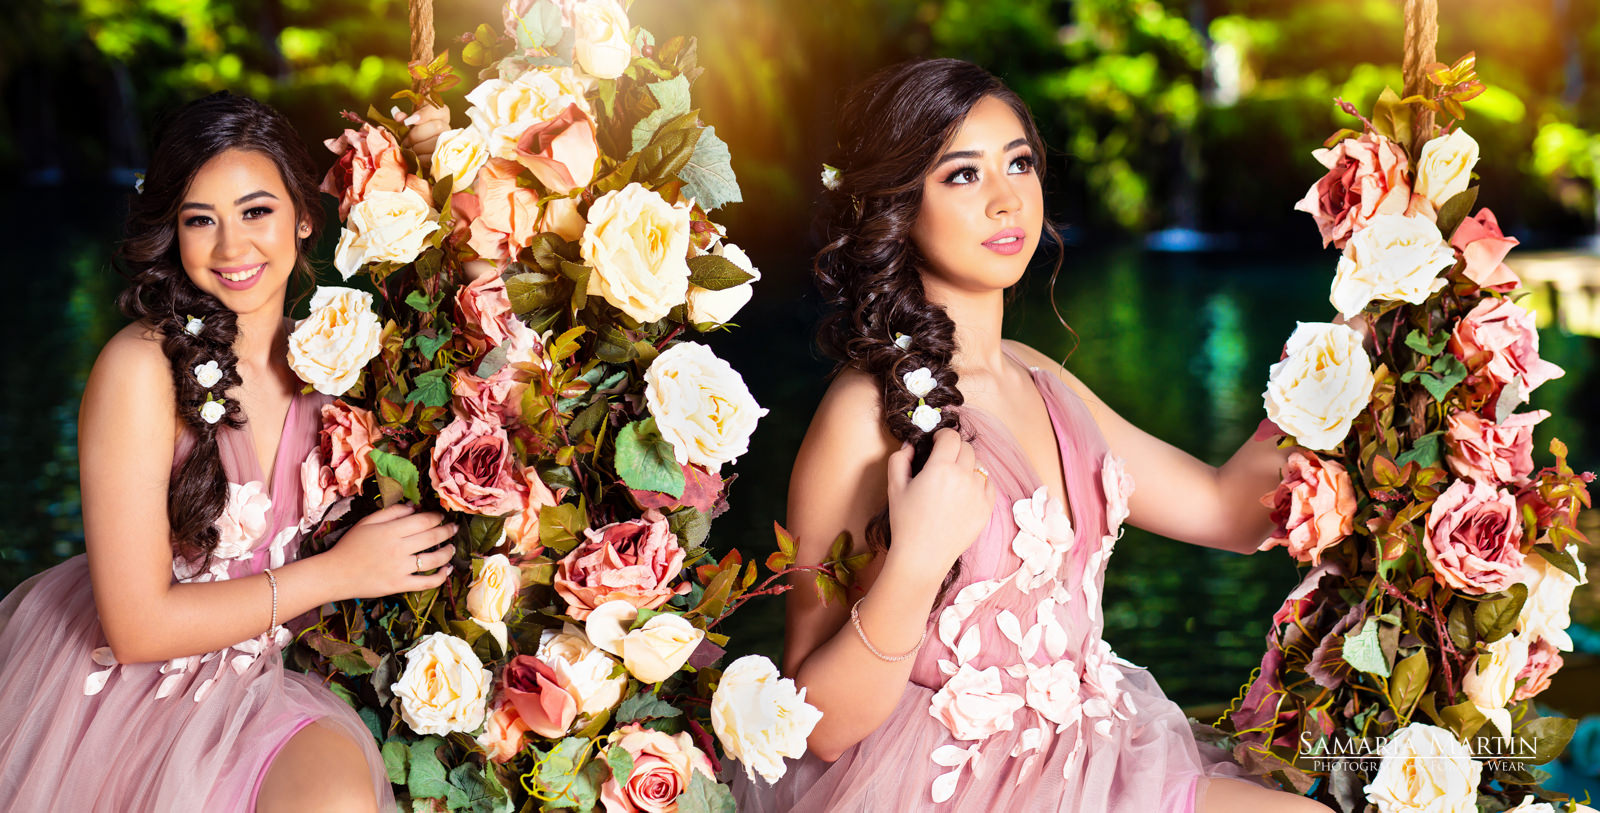 Quinceanera photoshoot with flowers, sweet 15, Samaria Martin photography, Miami dress rental, best photographer near me